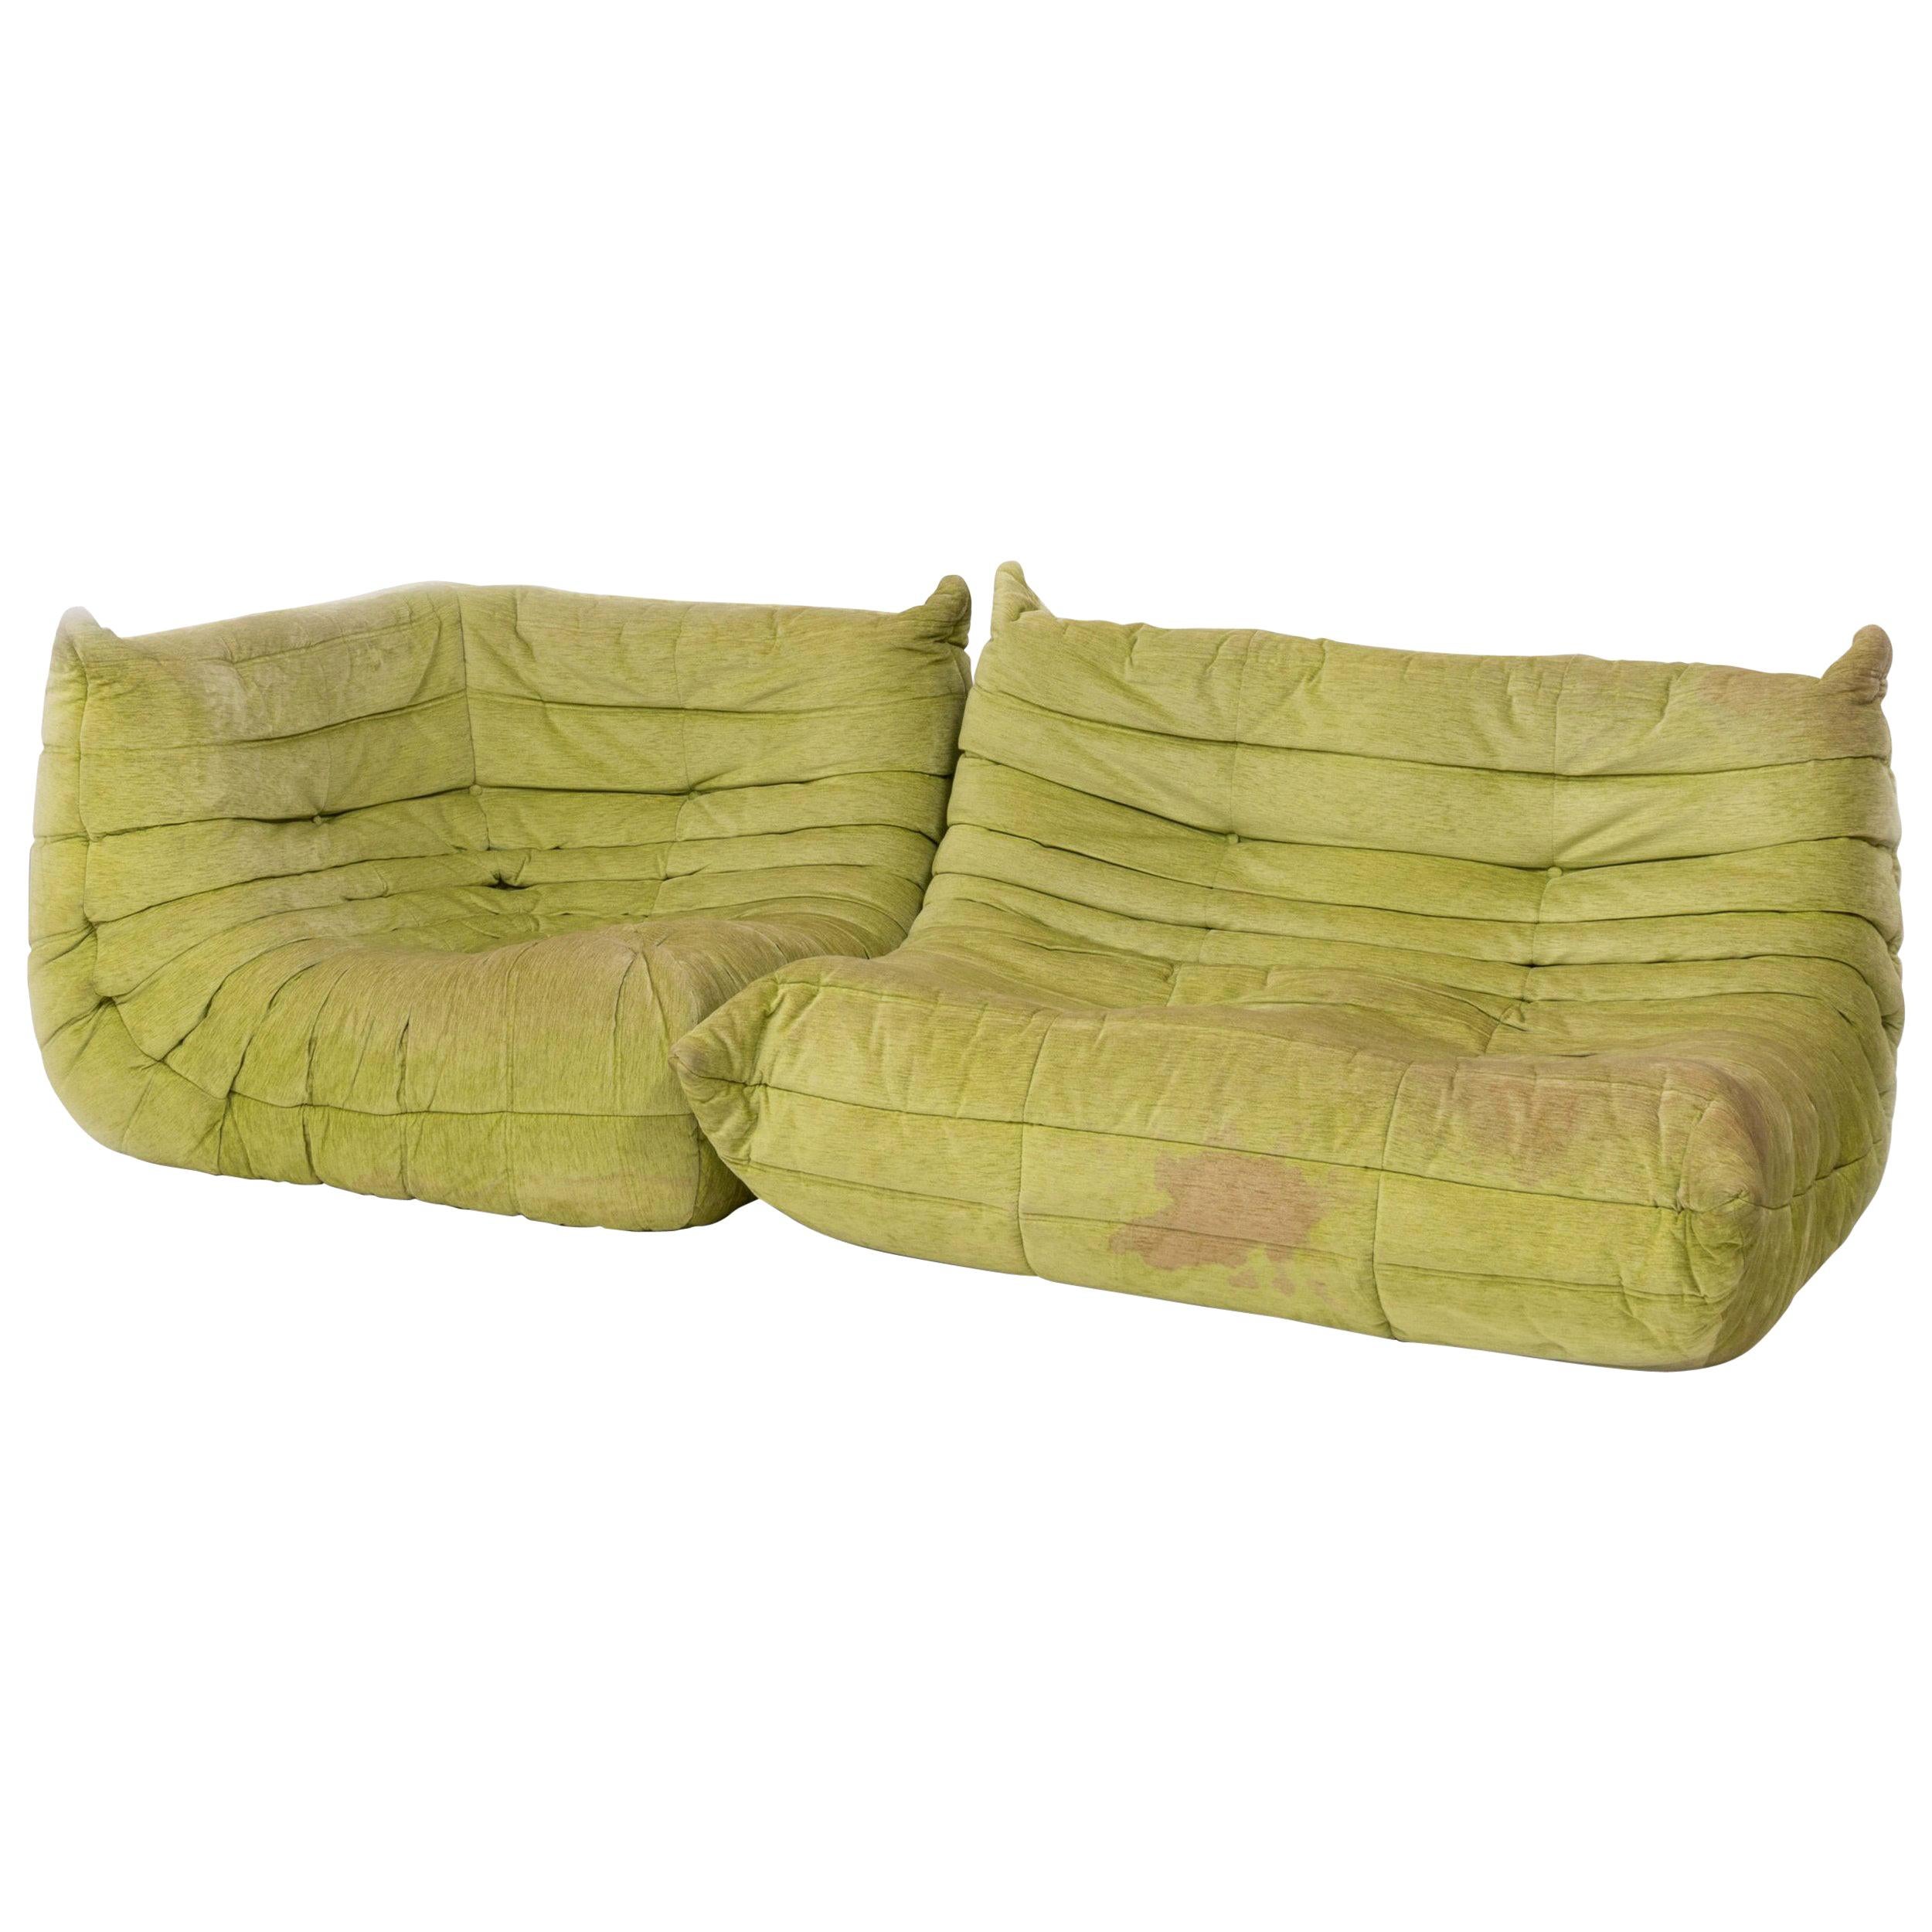 Togo Lime Green Fabric Sofa by Michel Ducaroy for Ligne Roset, Two-Piece Set